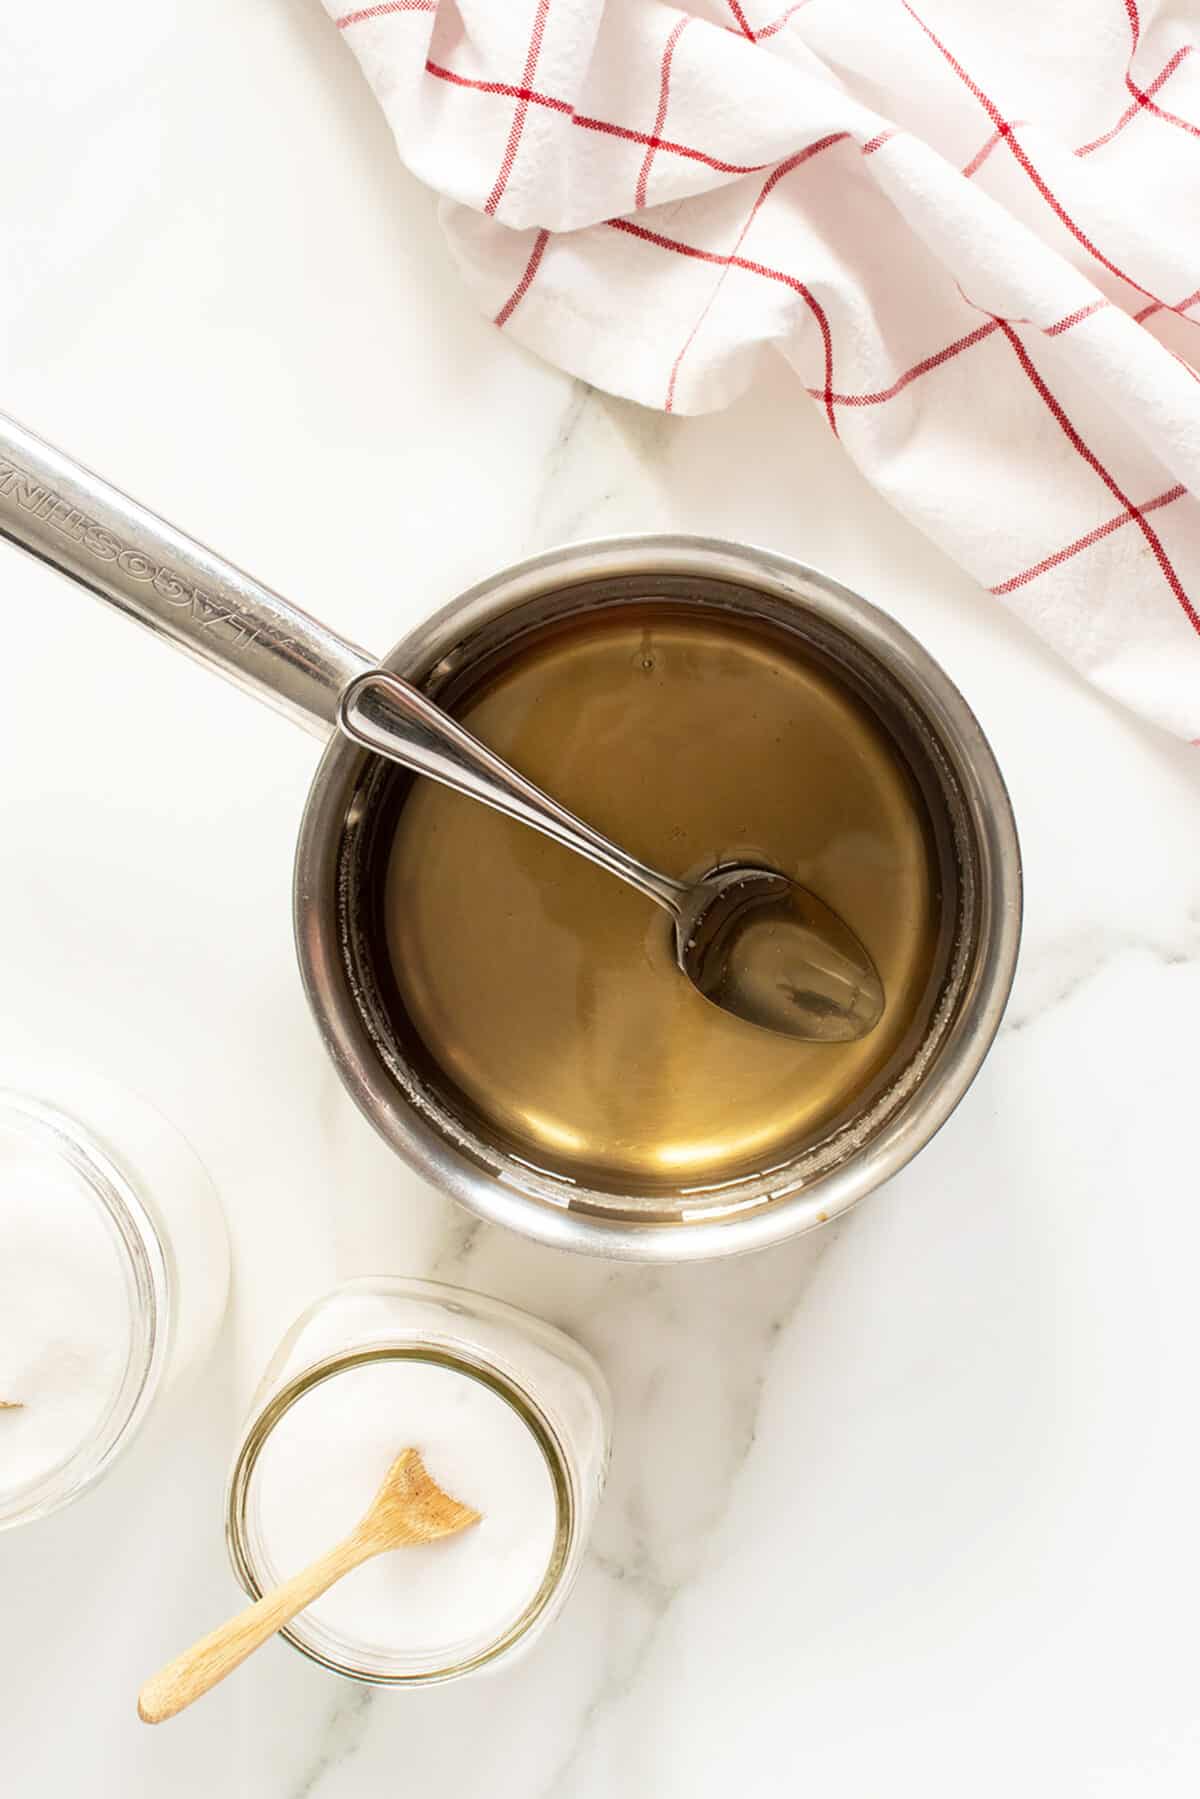 caramel syrupin a pot with a spoon